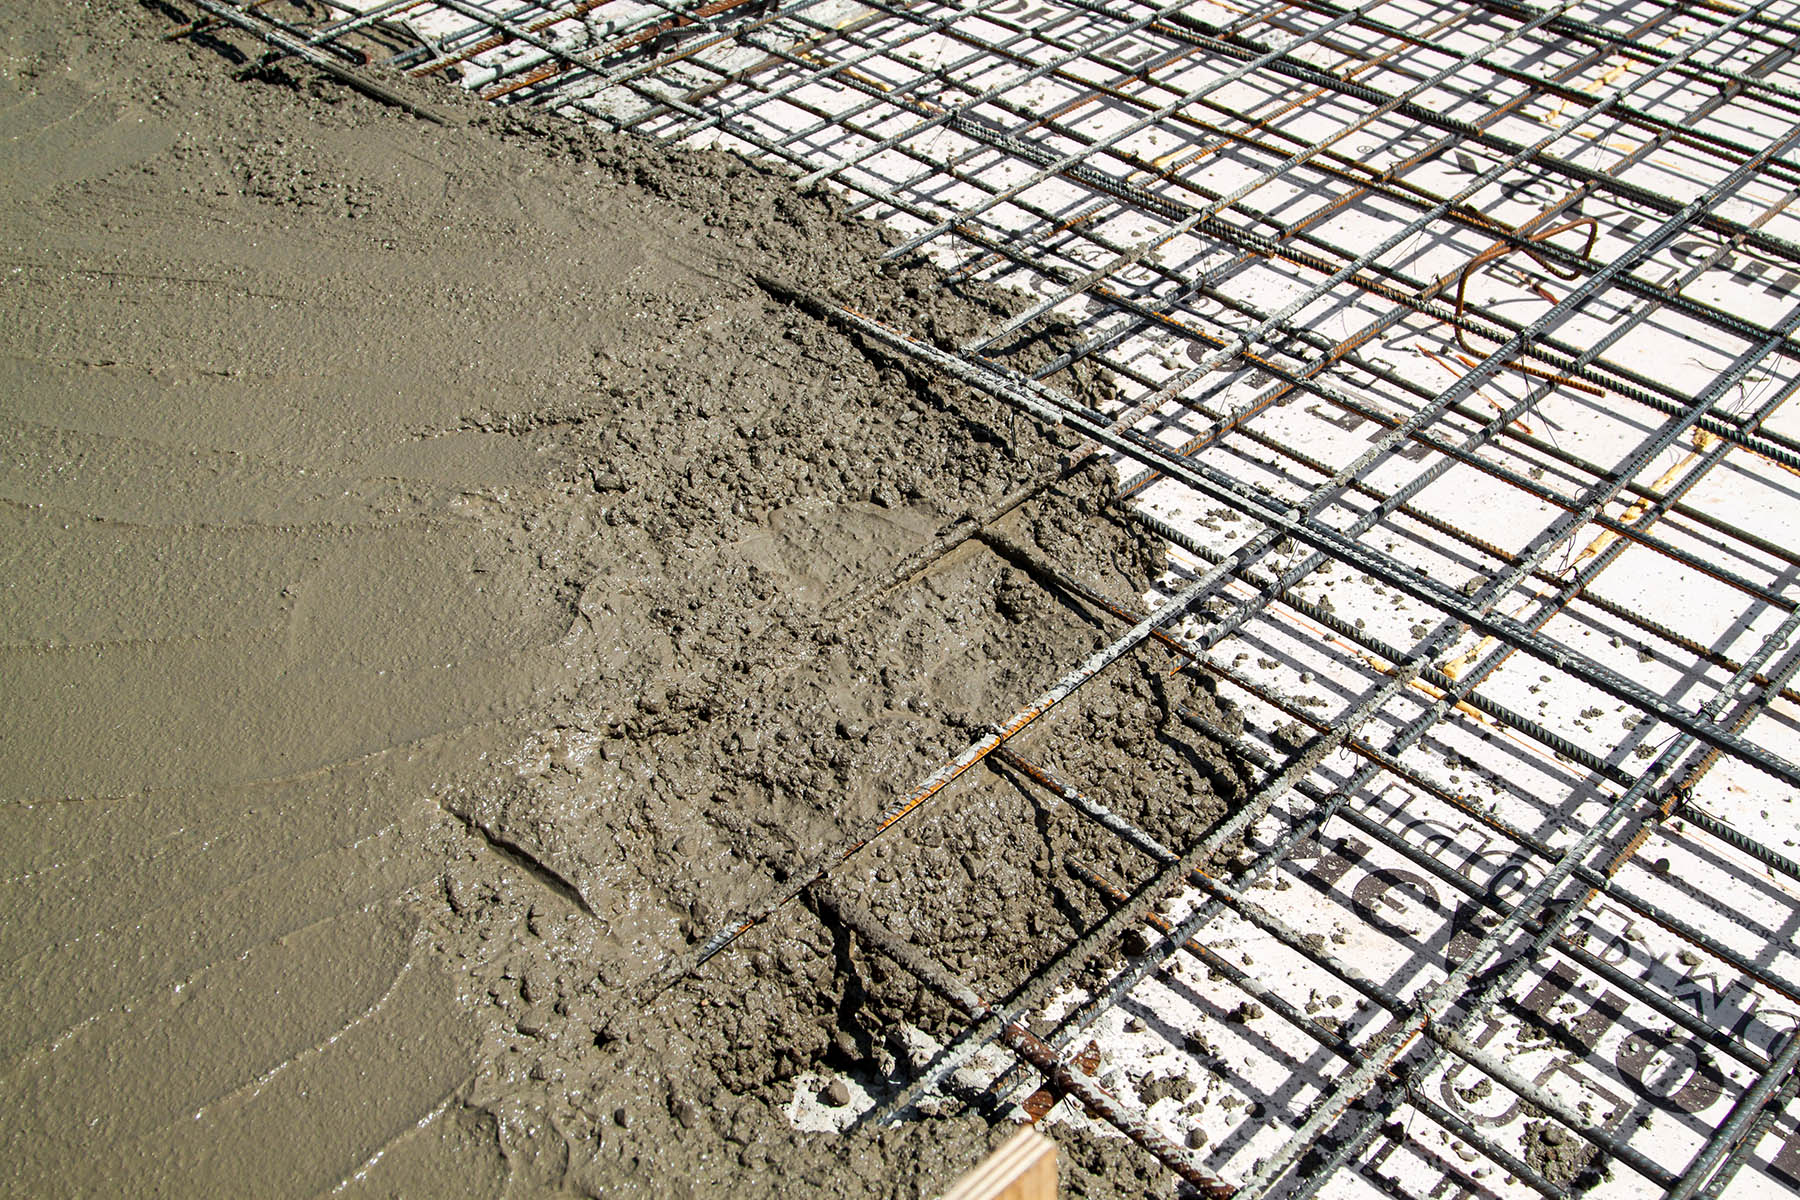 Reinforced Concrete: Understanding its Strength and Versatility